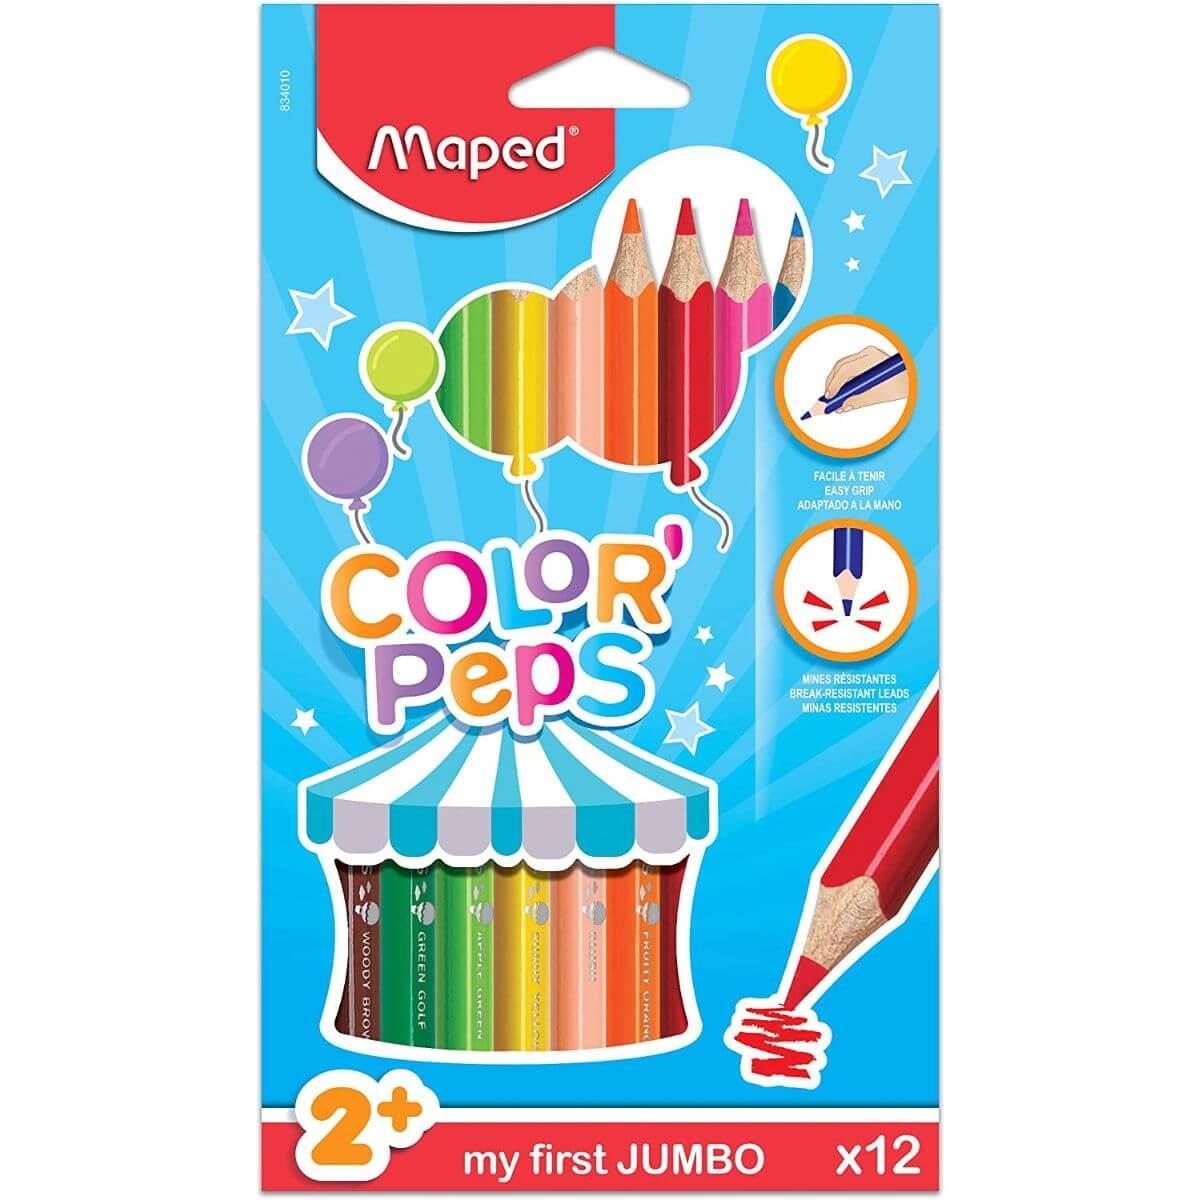 Maped Colour'peps My First Jumbo Colouring Pencils x 12